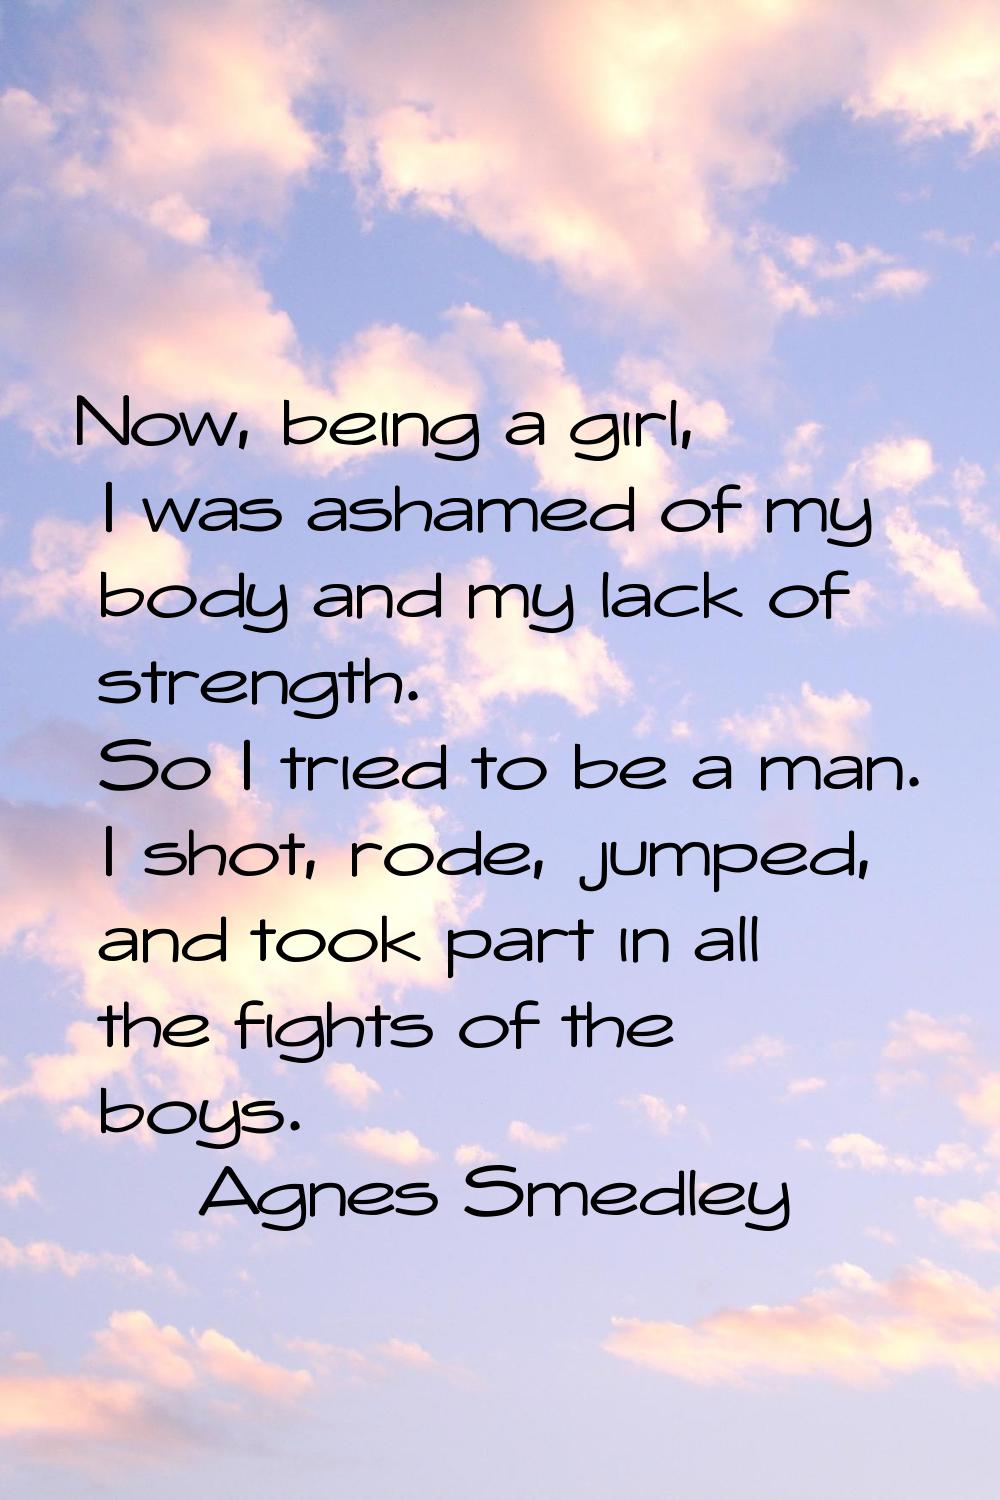 Now, being a girl, I was ashamed of my body and my lack of strength. So I tried to be a man. I shot